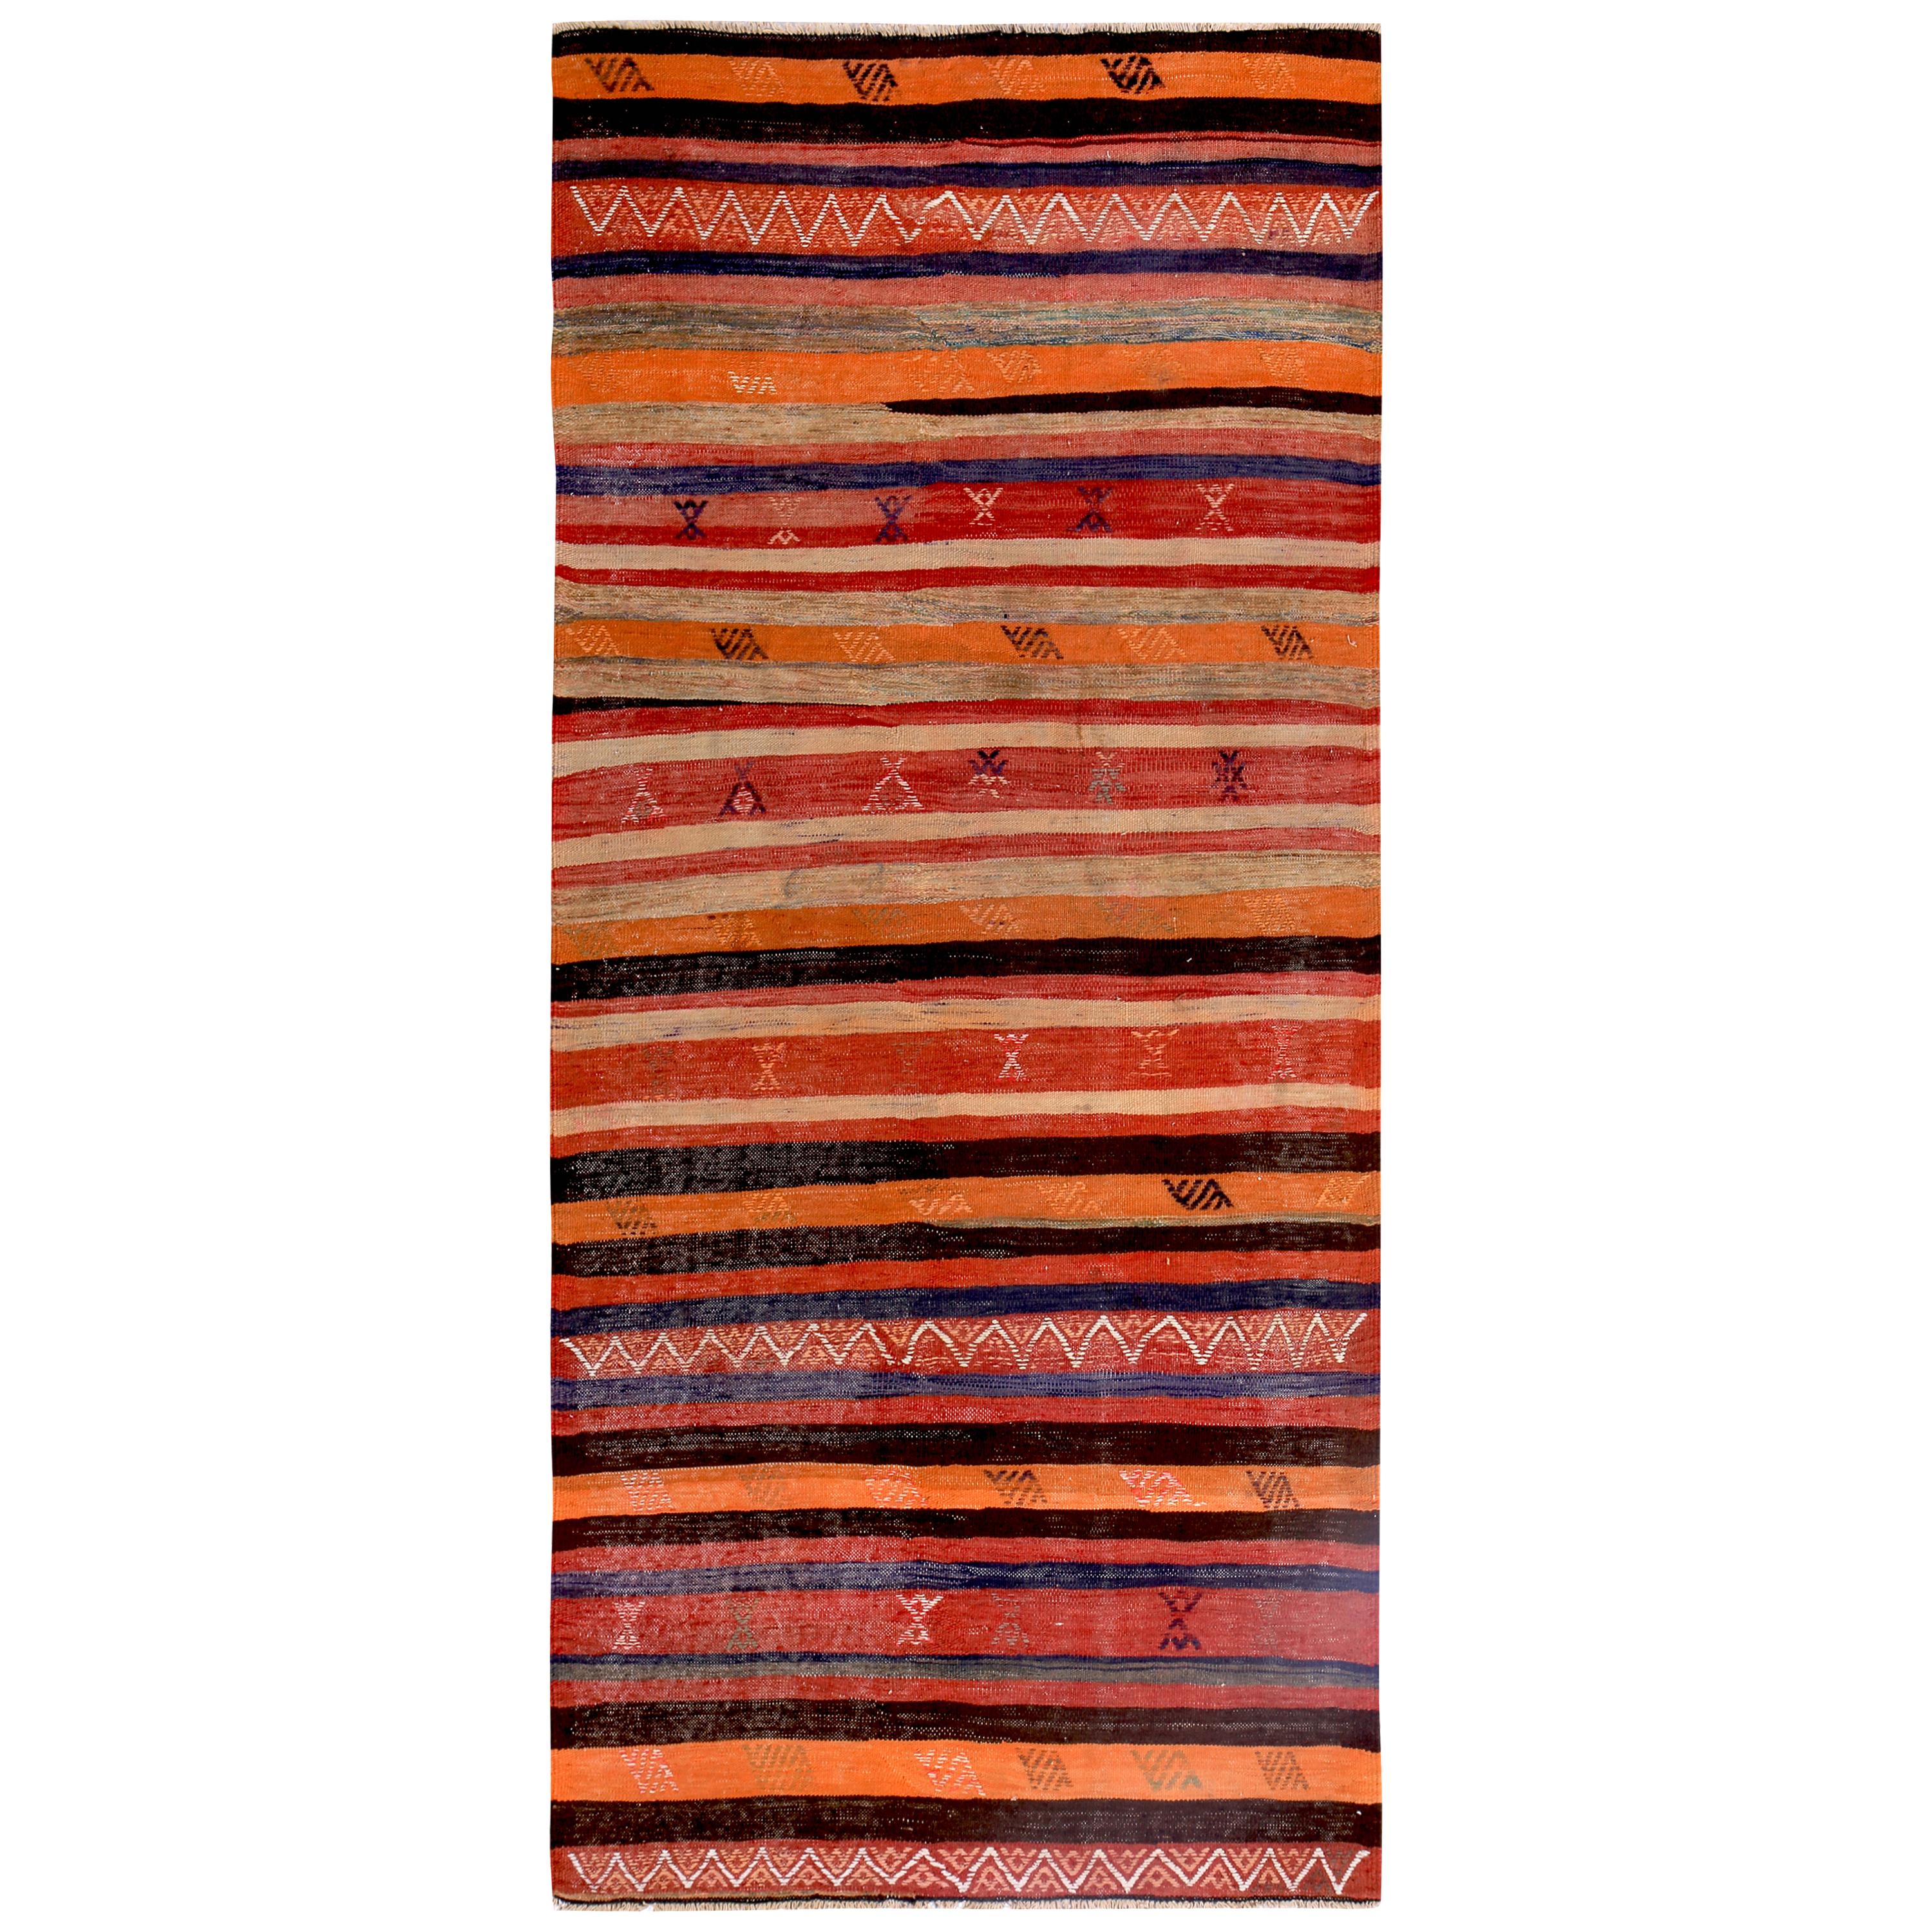 Turkish Kilim Runner Rug with Red and Orange Stripes and Tribal Patterns